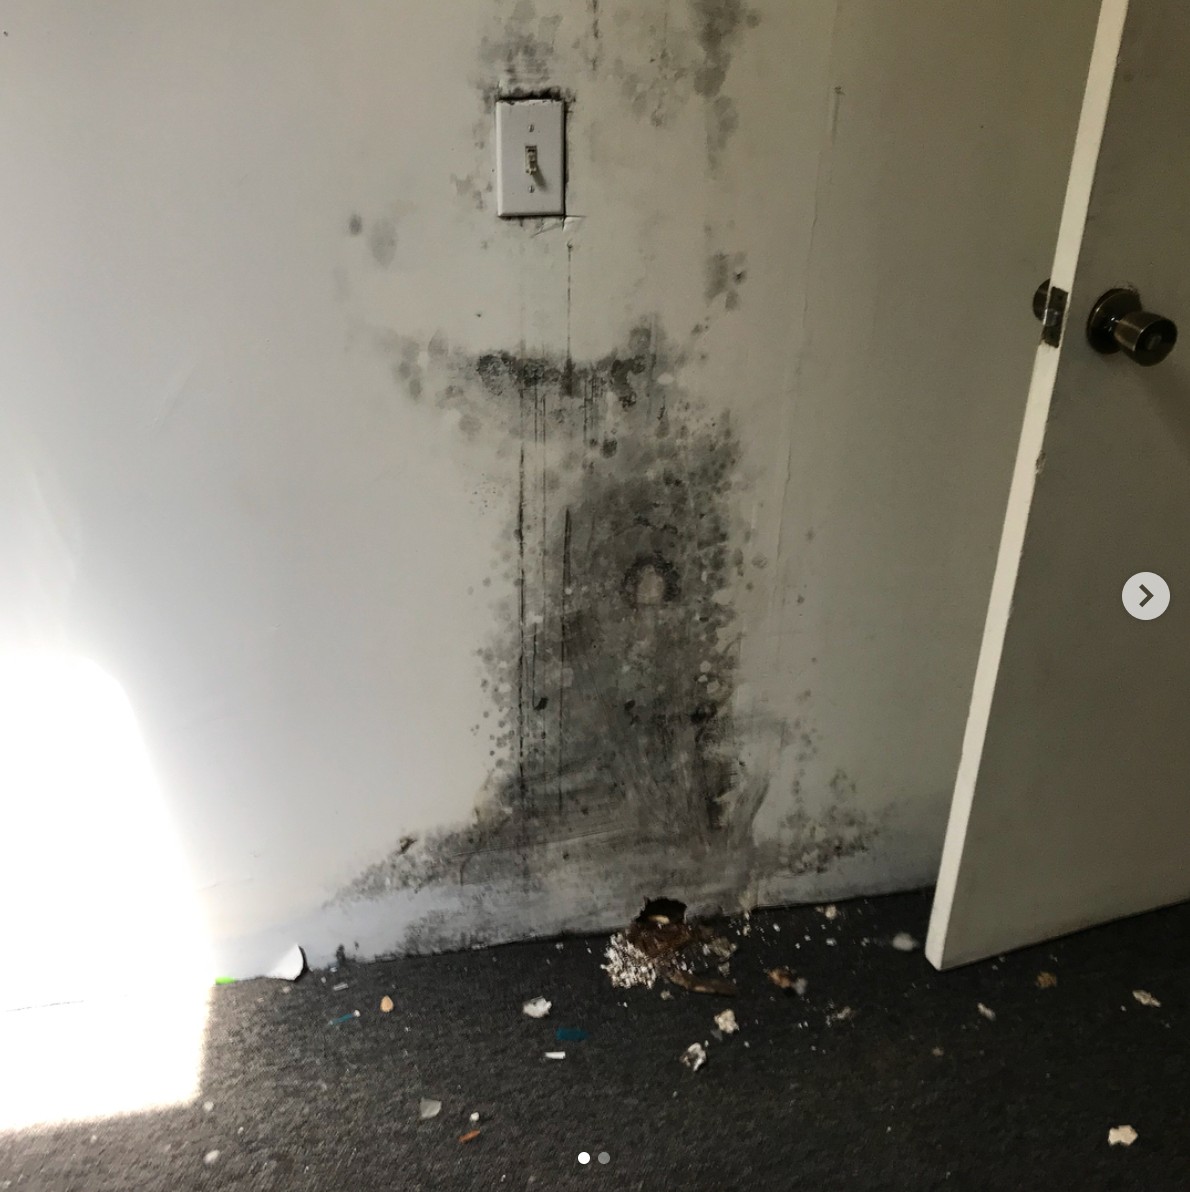 Ask about our mold inspection service, as a standalone or added to any property inspection for an additional cost. Find out more by visiting our website at inspectaproperty.com/mold-inspectio…

#home #inspection #socalrealestate #homeinspector #moldinspection #moldinspector #blackmold #mold